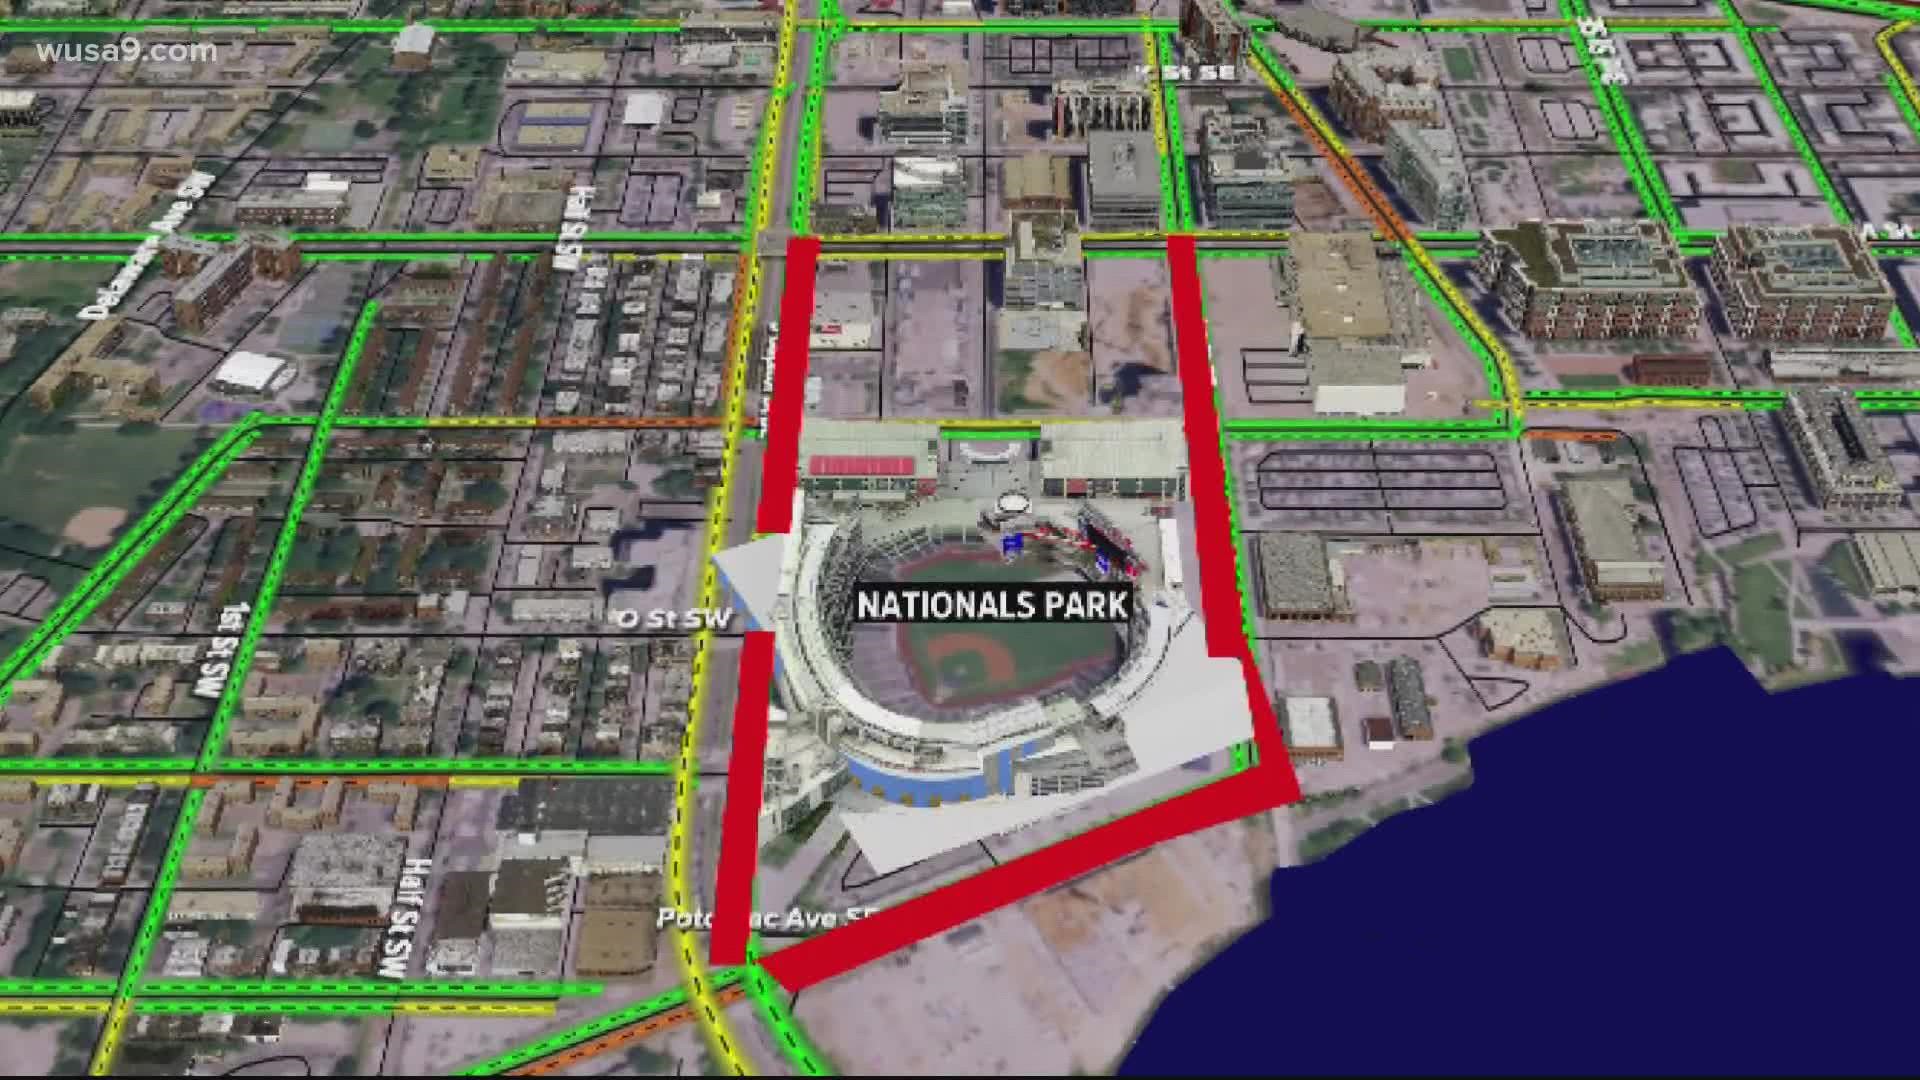 Parking and traffic restrictions for Nationals games